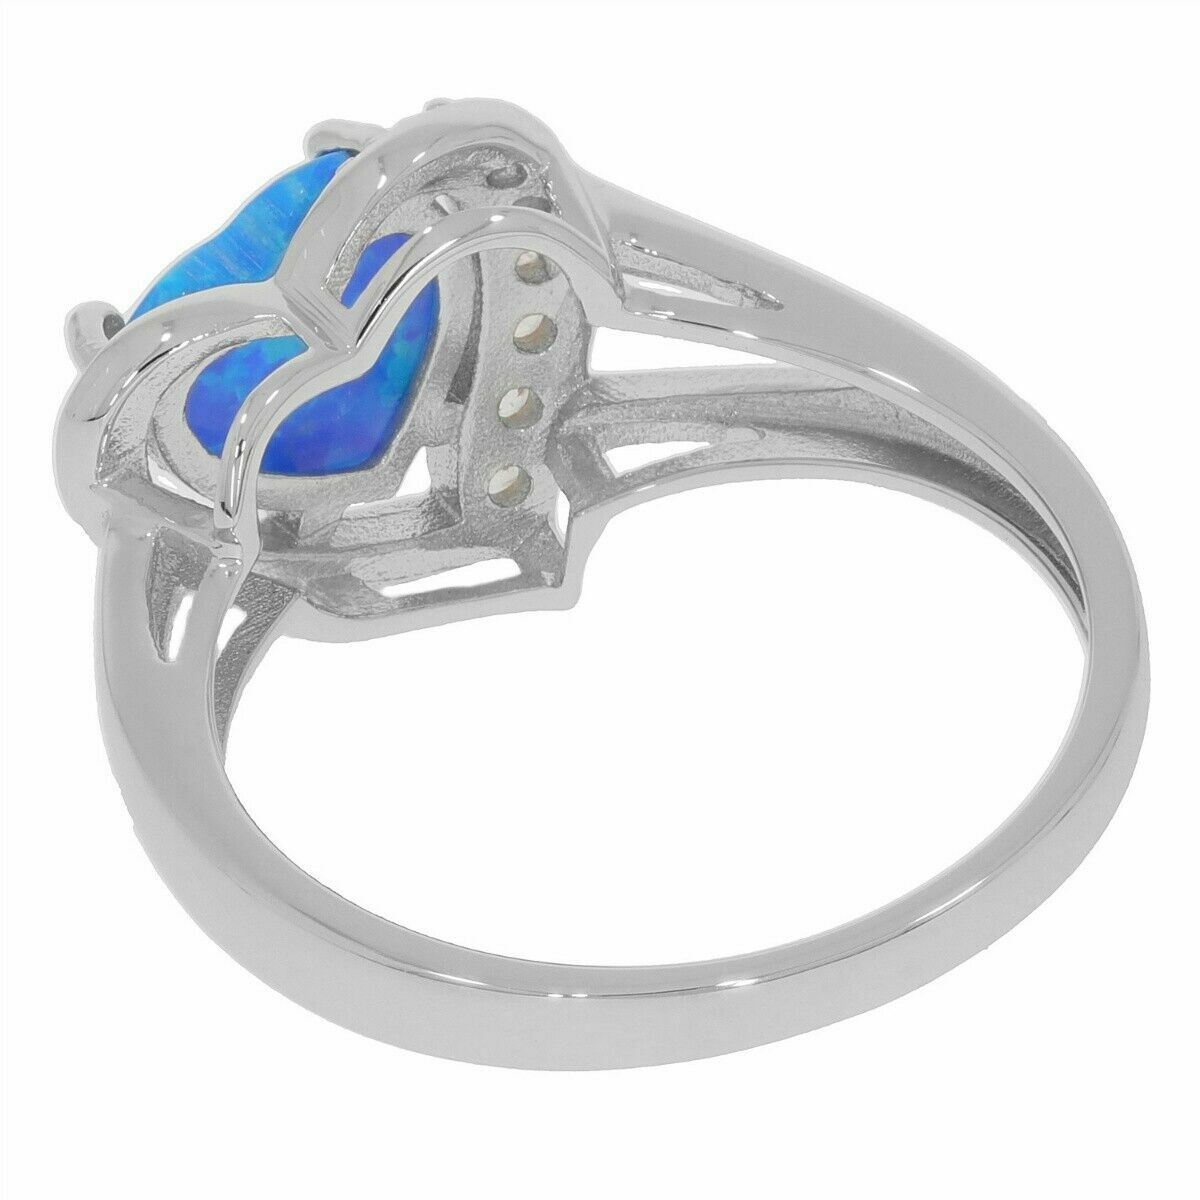 Sterling Silver Semi Mount Ring Setting Heart HT 8x8mm White Topaz size 6.25